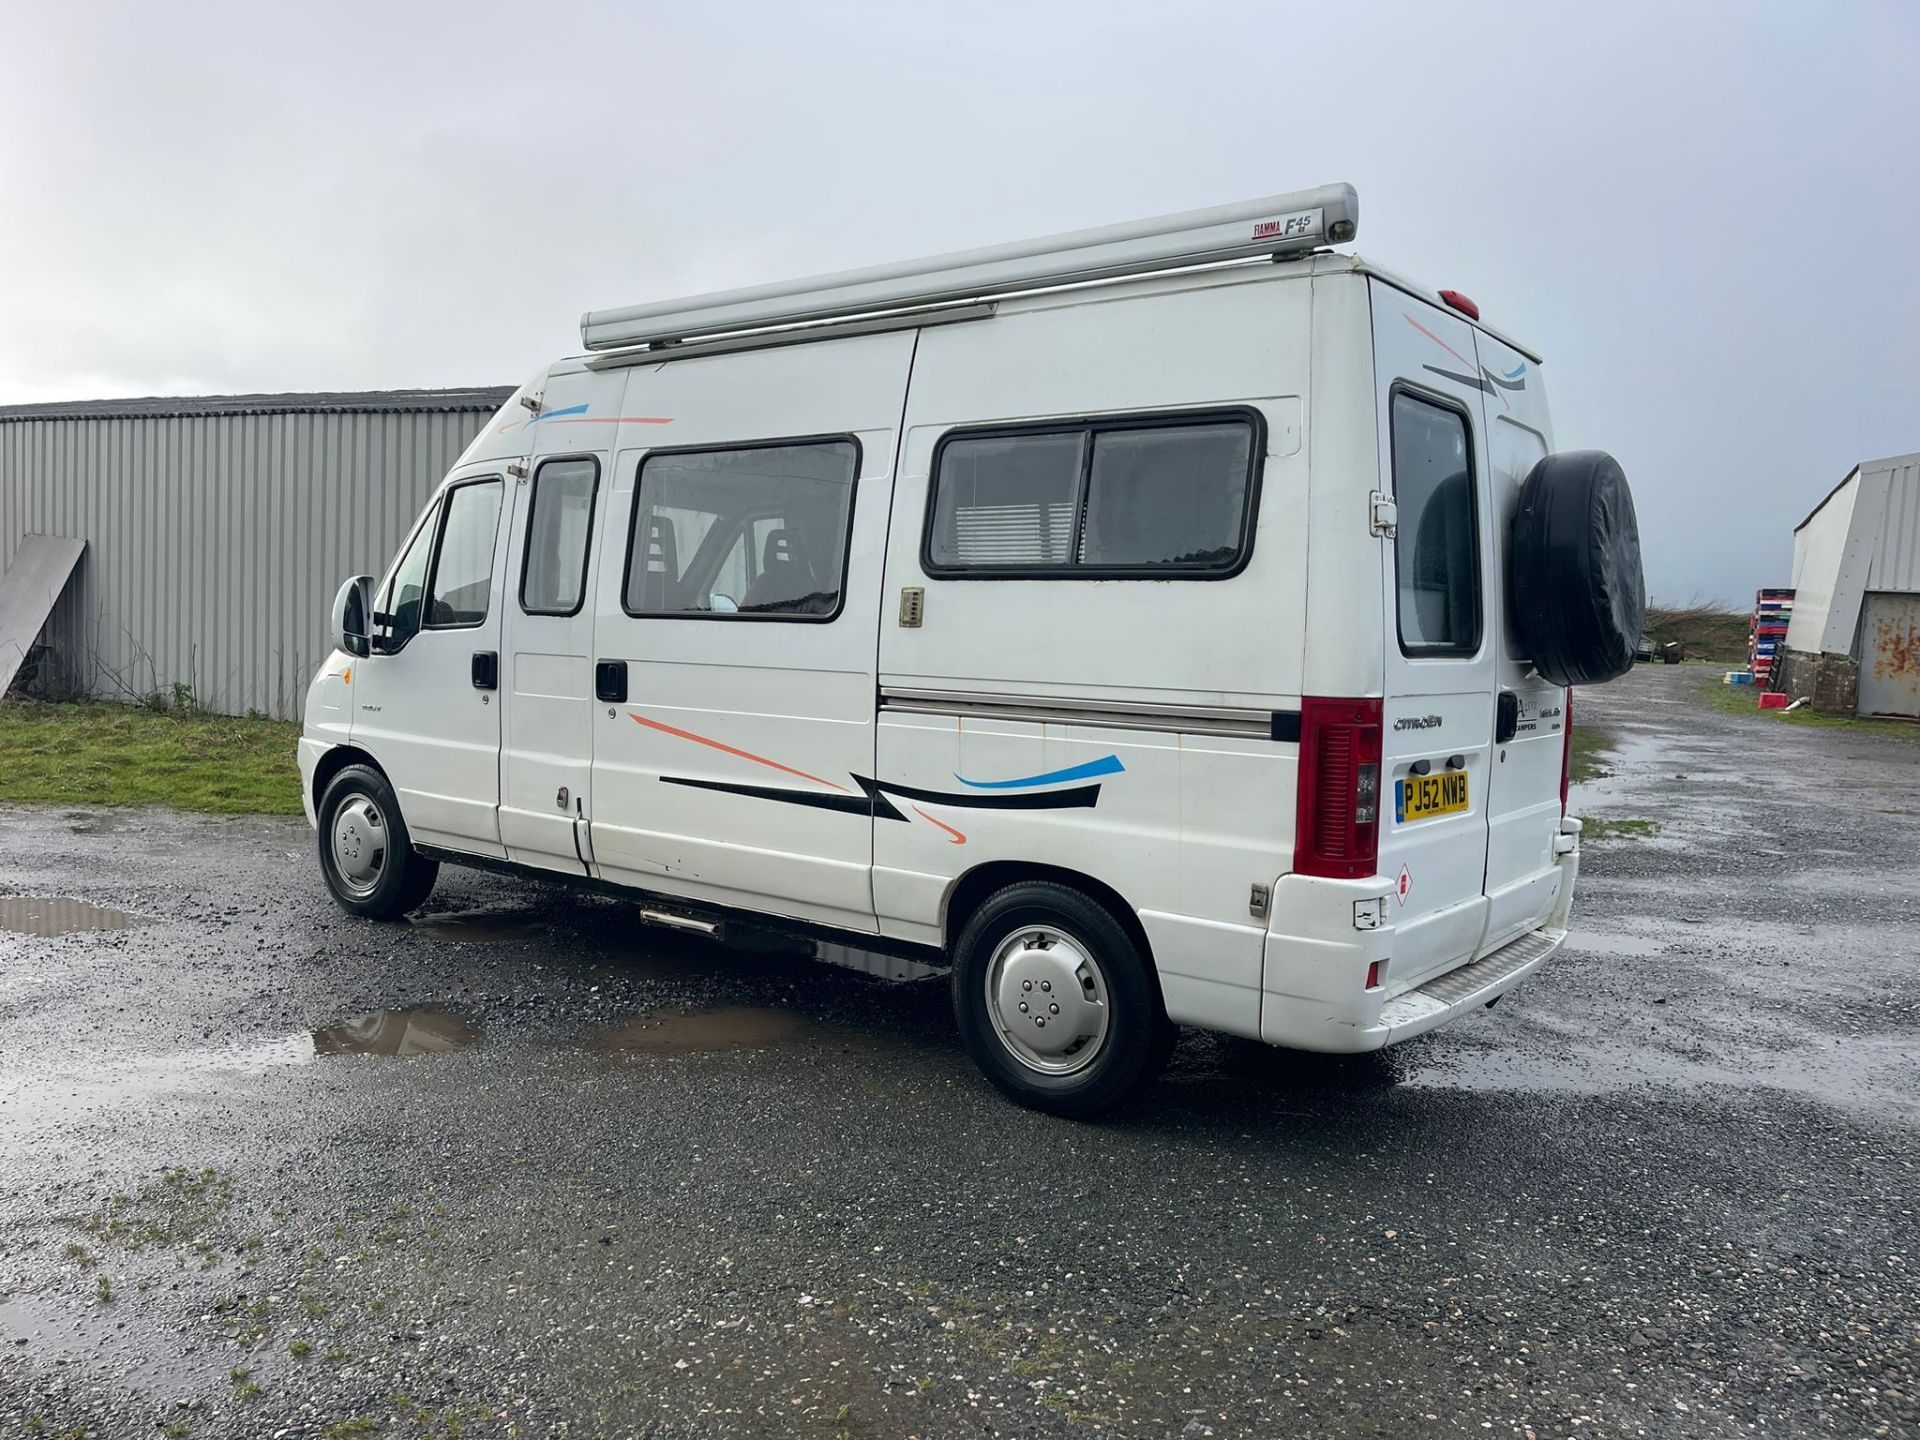 Aztec Camper on Citroen Relay cassis. - Image 6 of 61